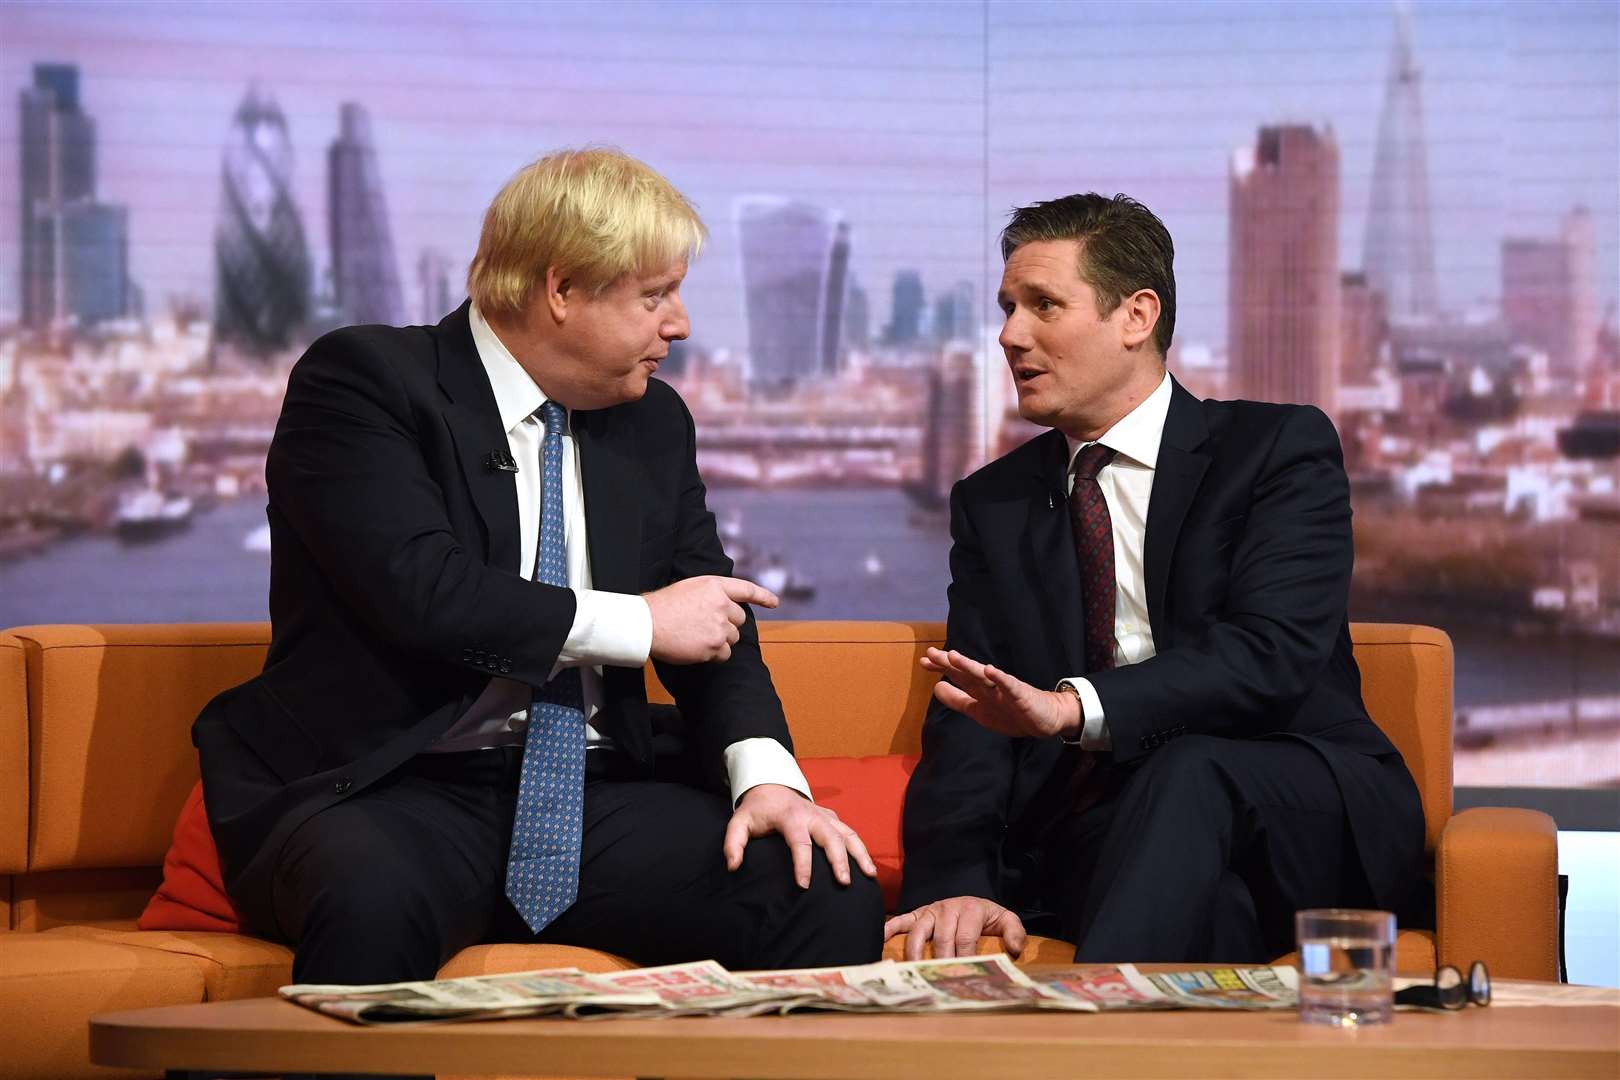 Keir Starmer said that Boris Johnson should deliver on his promise on an ‘oven-ready’ Brexit deal (Victoria Jones/PA)